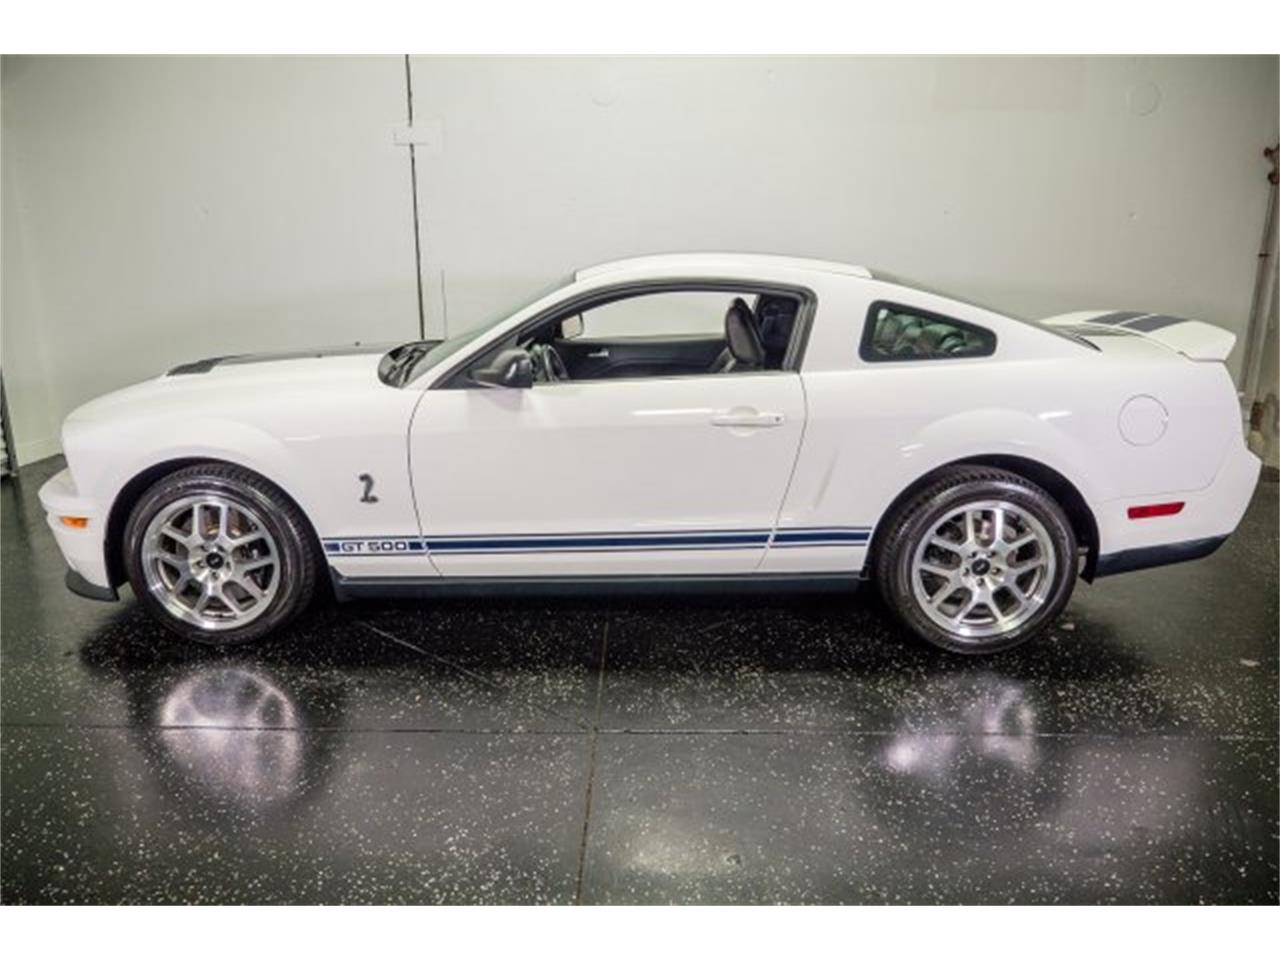 2007 Ford Mustang for sale in West Palm Beach, FL – photo 2